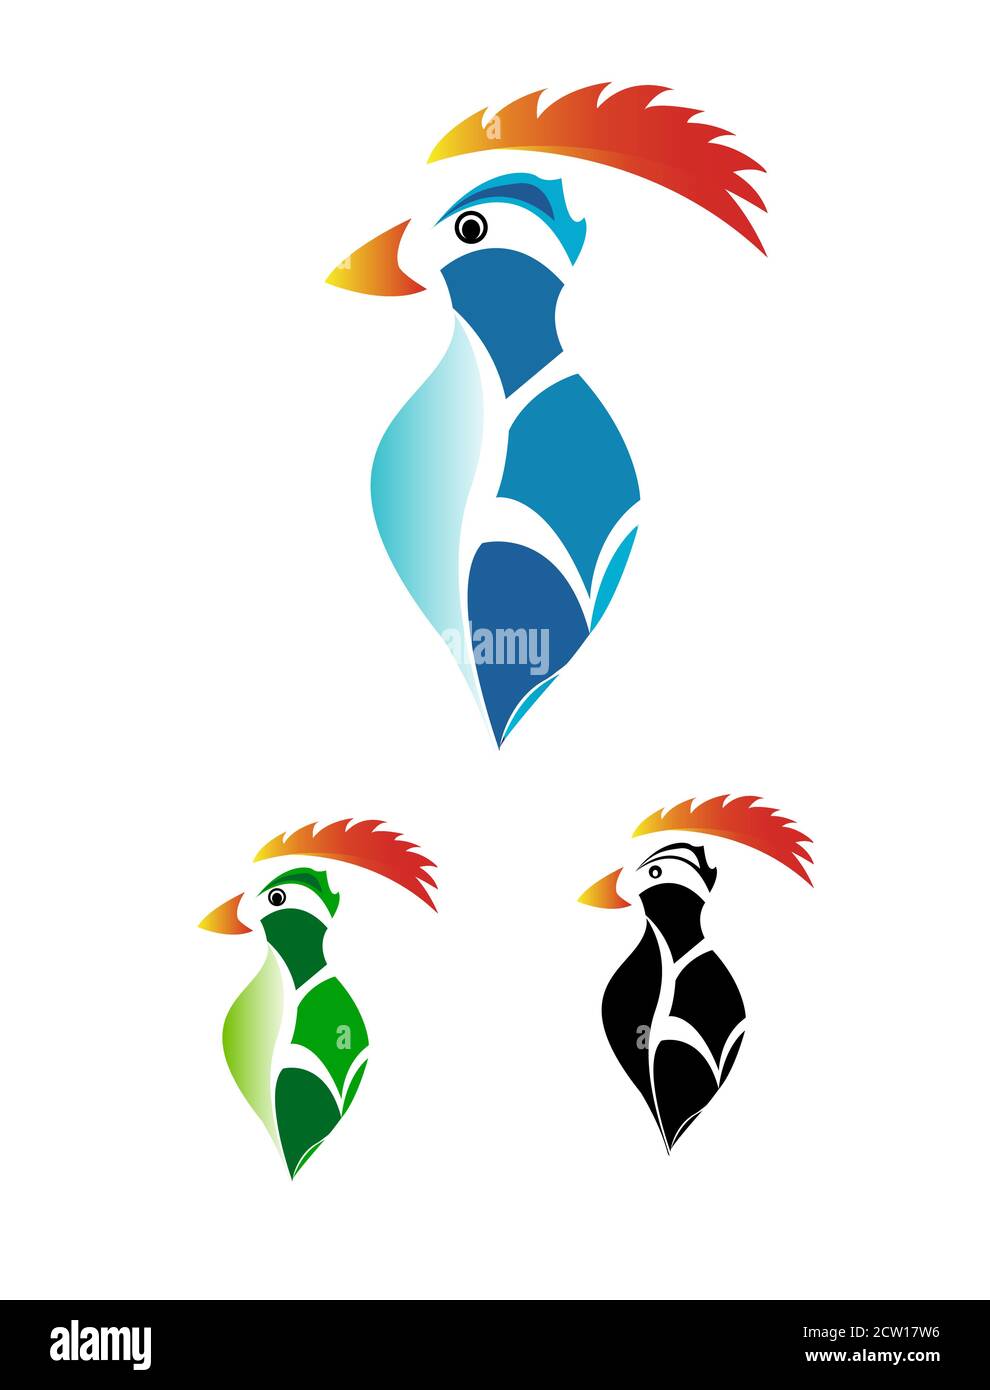 Woodpecker vector illustration in different colour combinations for logo making, website designing. Stock Vector